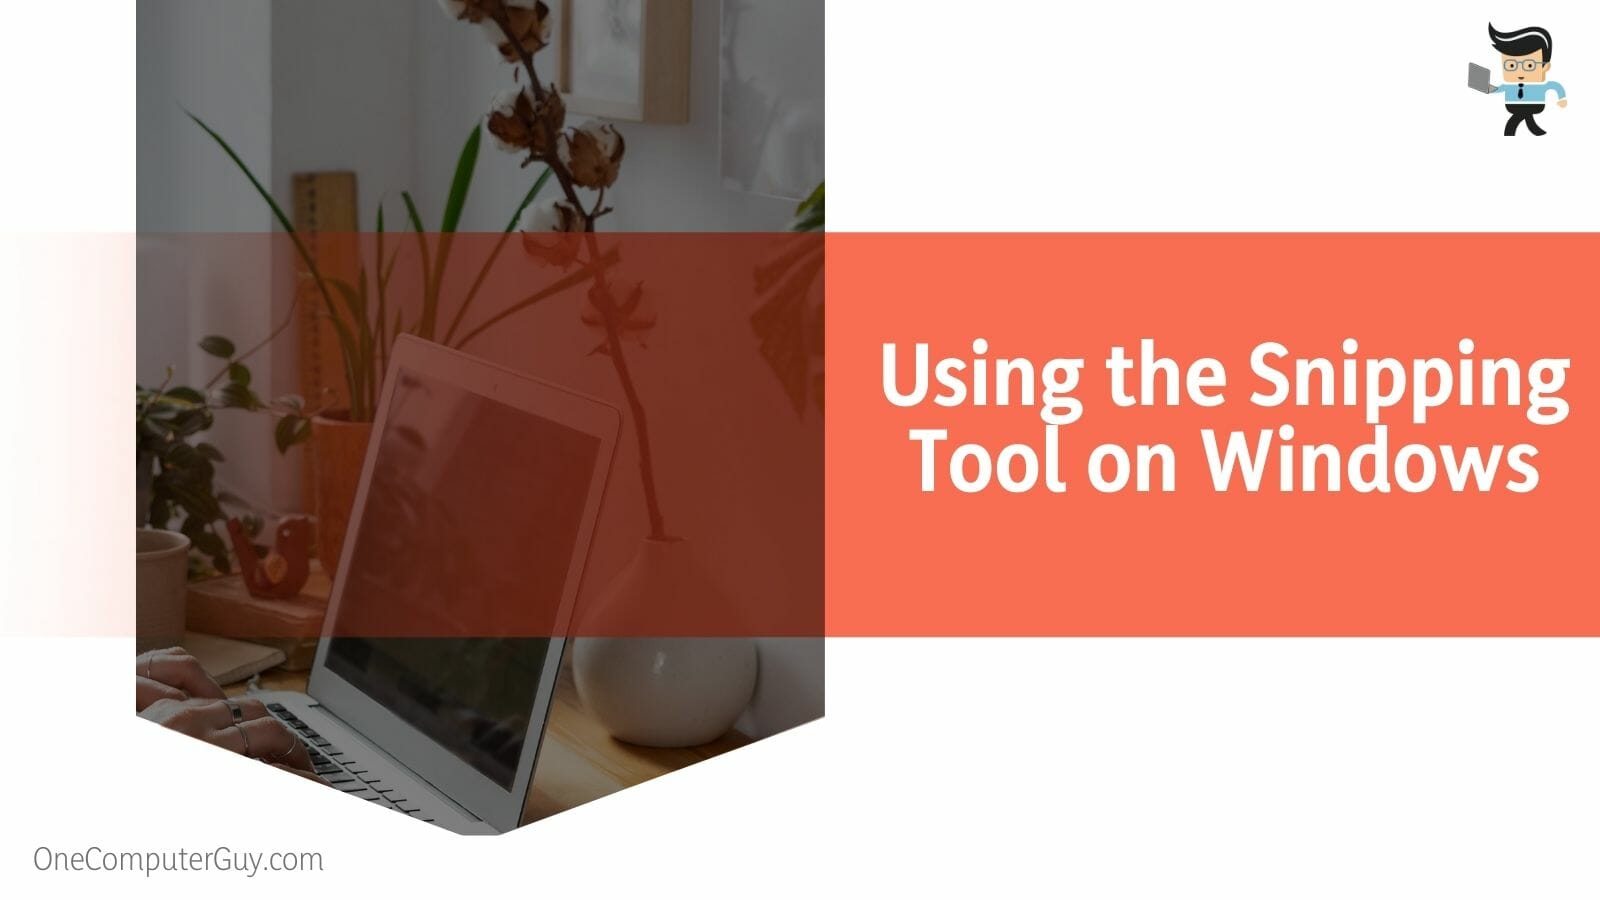 Using the Snipping Tool on Windows